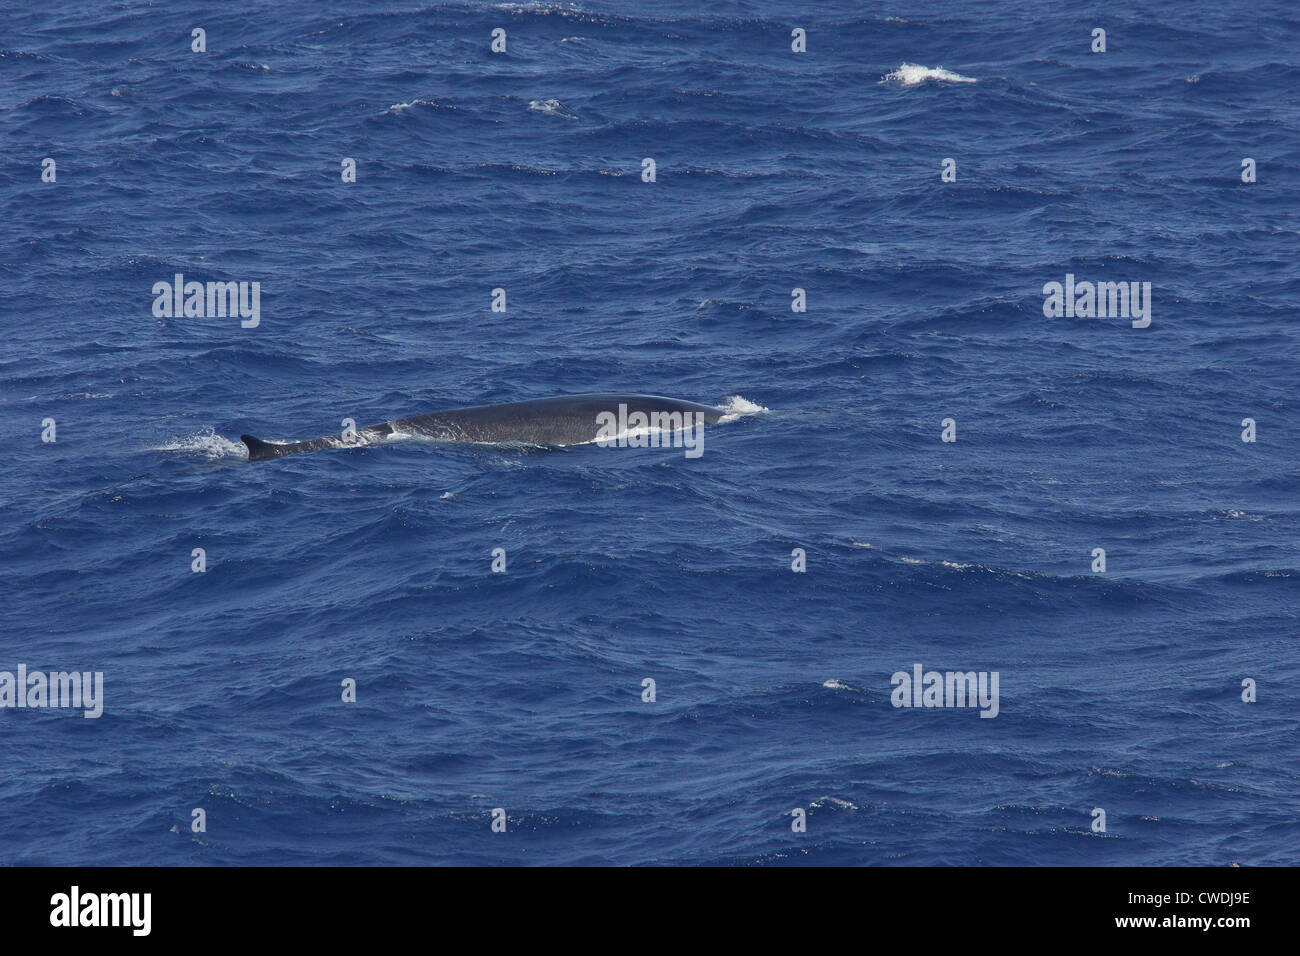 Fin Whale Balaenoptera physalus surfacing and blowing, Bay of Biscay Stock Photo